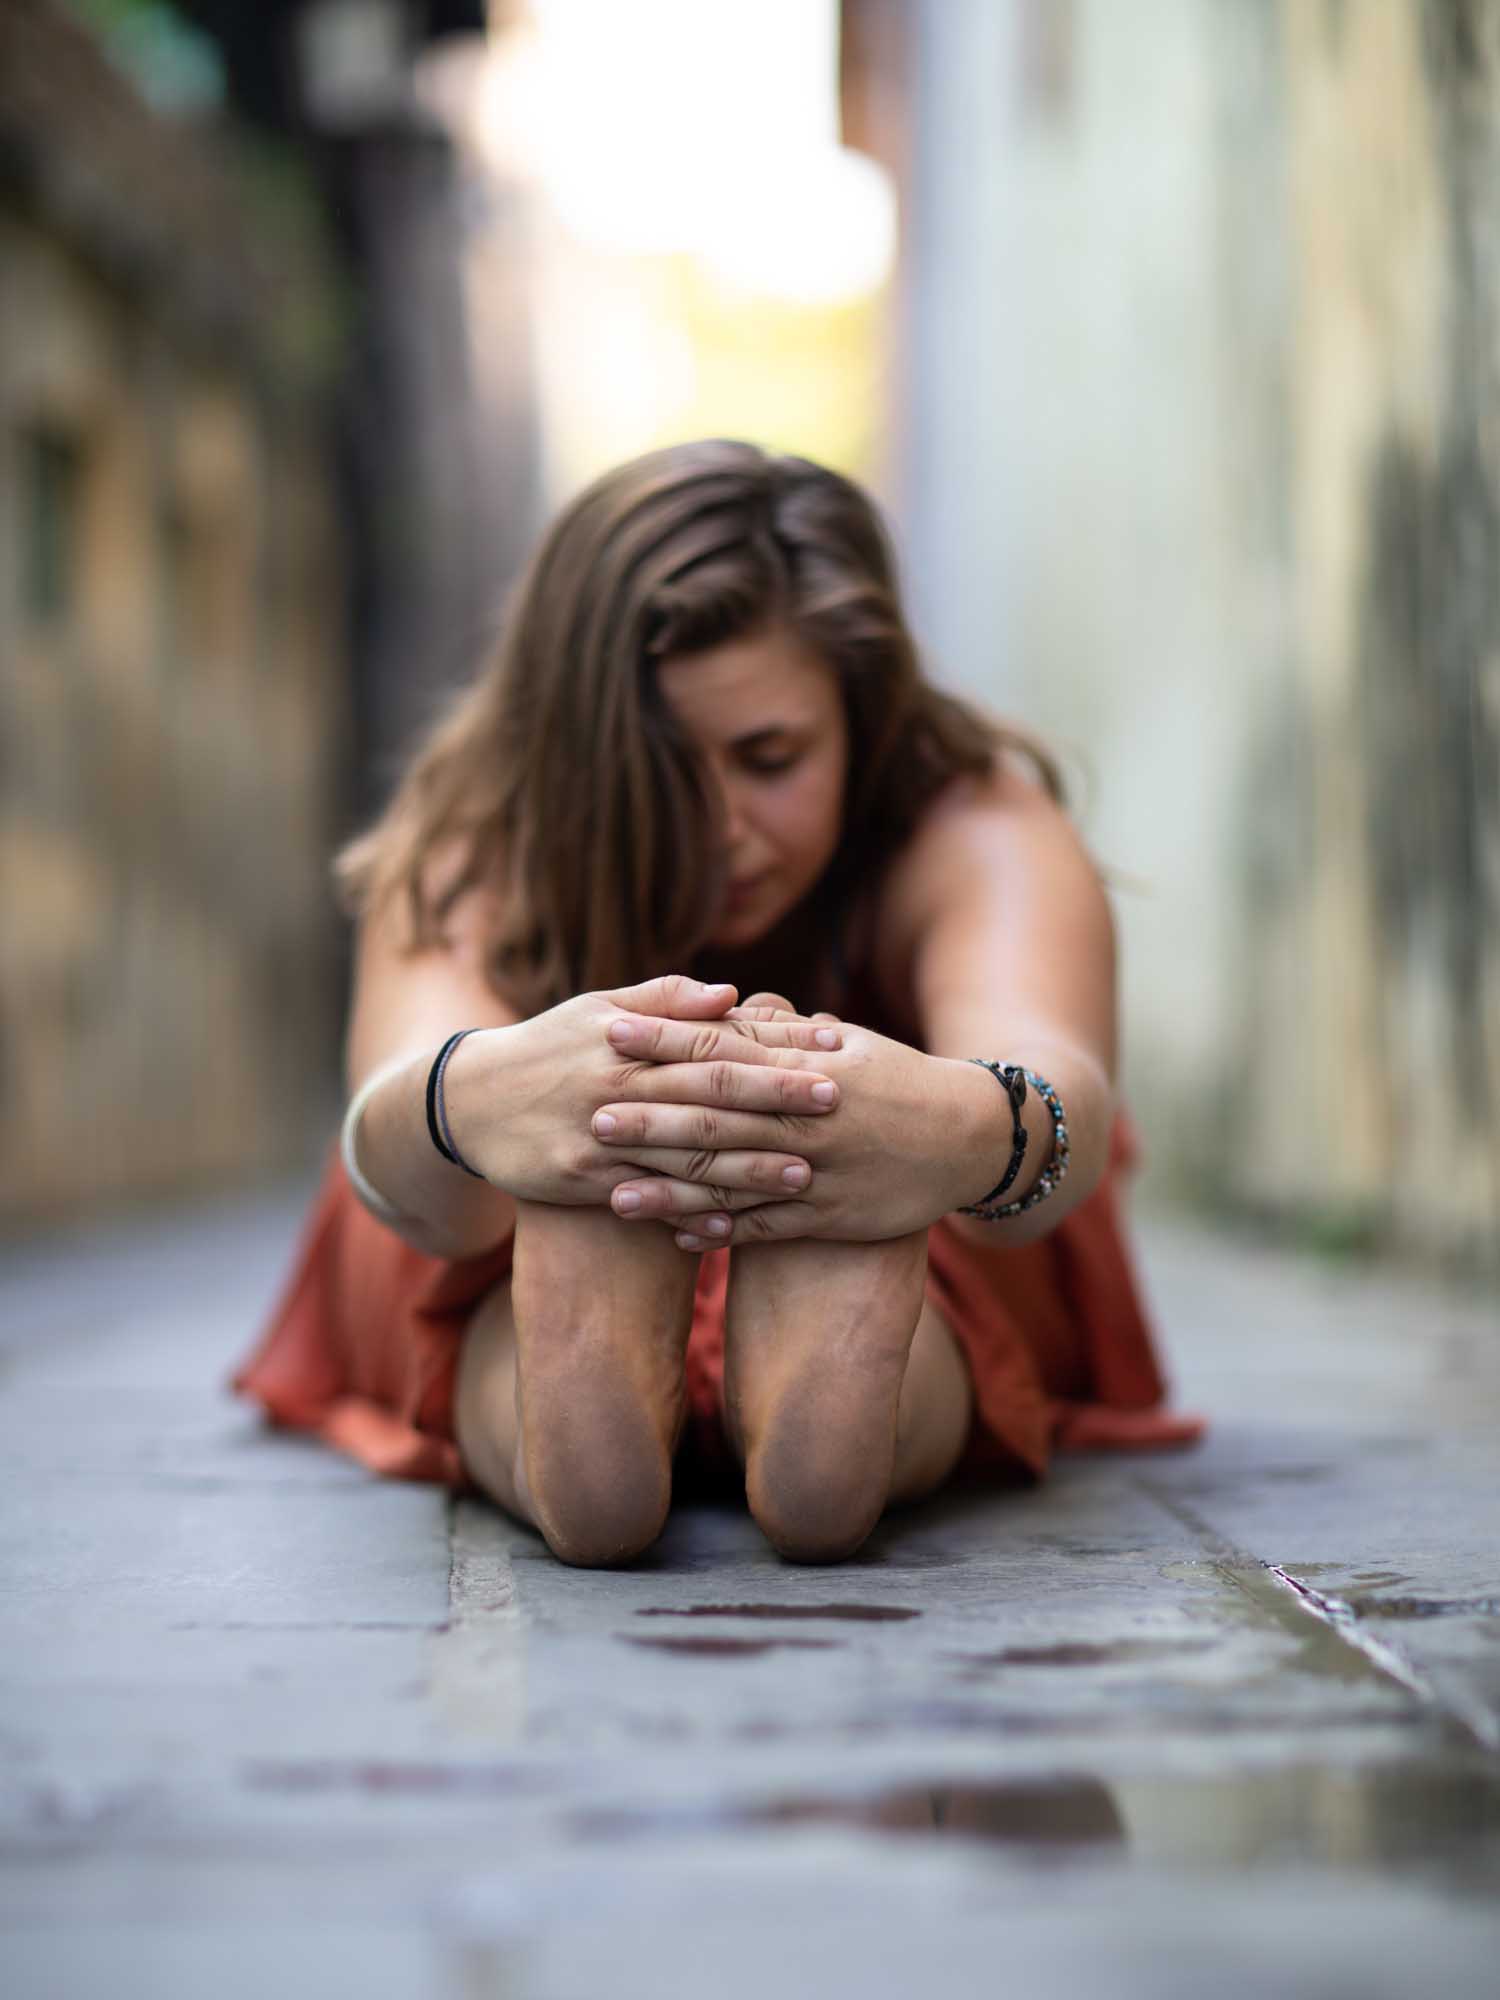 Woman touches her toes in a sitting position in an alleyway